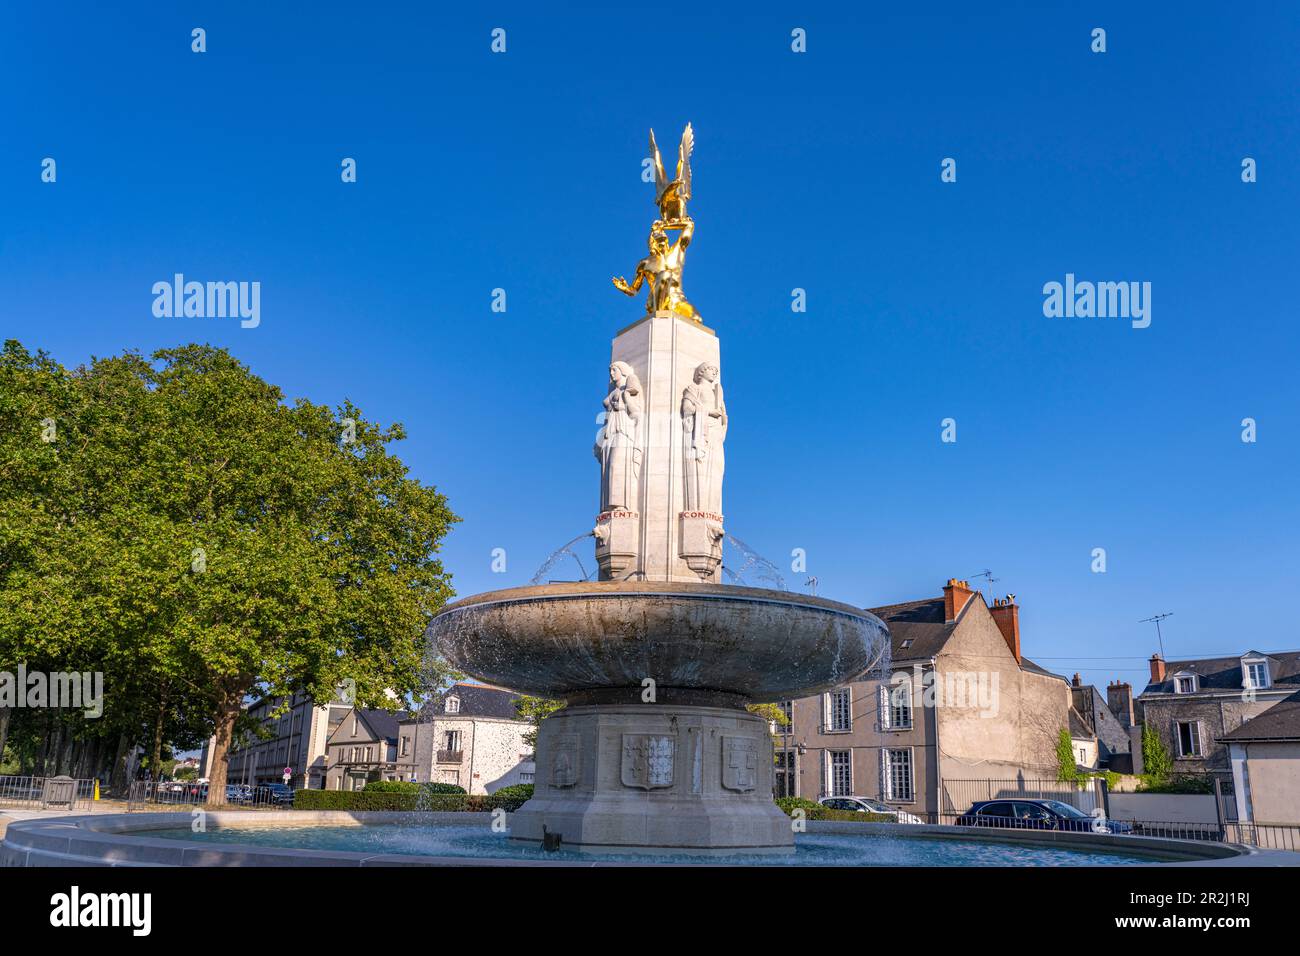 Gold statue of a Native American with eagle on the Tours American Monument fountain, Tours, Loire Valley, France Stock Photo